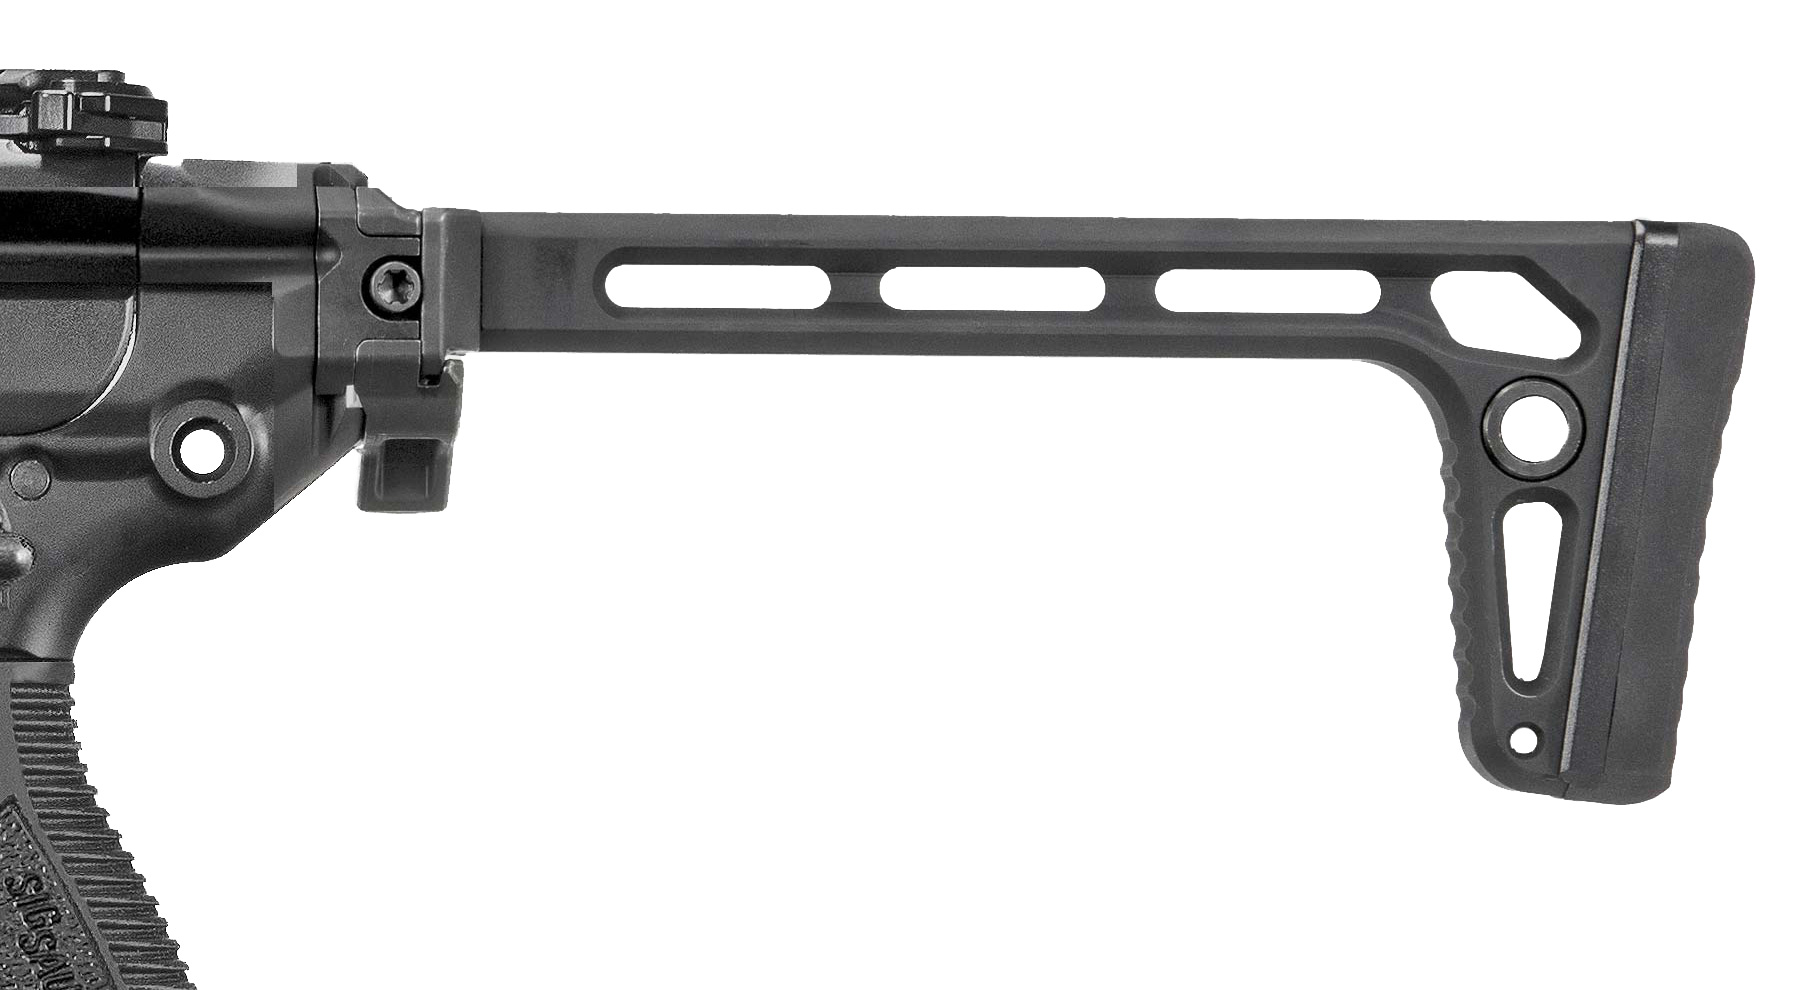 SIG SAUER MCX/MPX Folding Stock | 17% Off 5 Star Rating w/ Free S&H